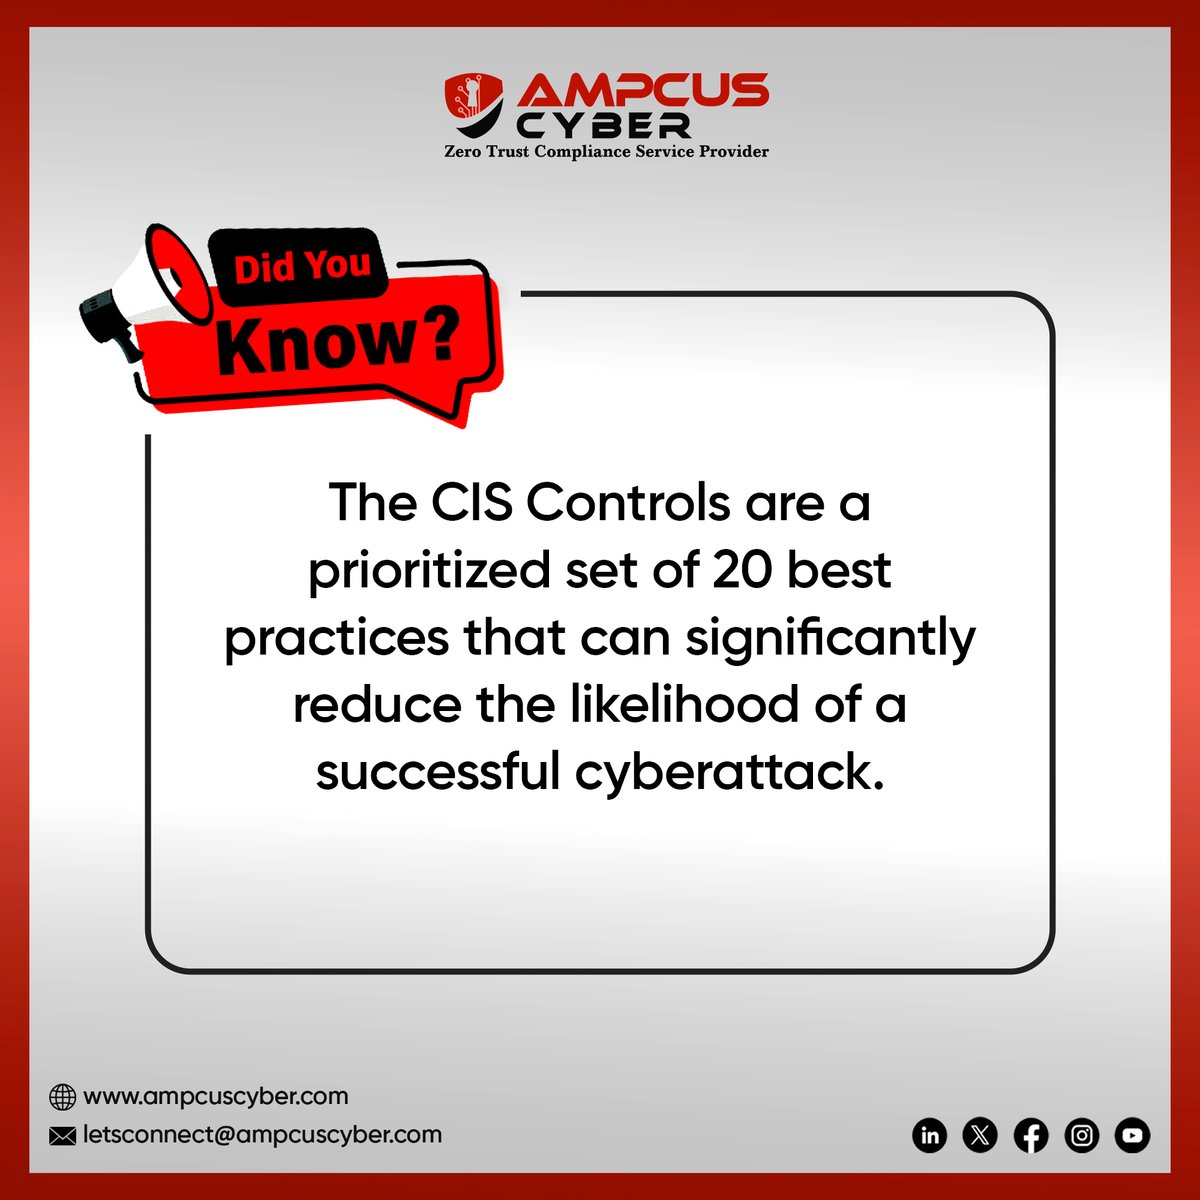 💡#Didyouknow that the CIS Controls are a prioritized set of 20 best practices that can significantly reduce the likelihood of a successful cyberattack.
 
#ampcuscyber #didyouknowfacts #cybersecuritytraining #securitytraining   #phishingattacks #vulnerabilities #cyberattack